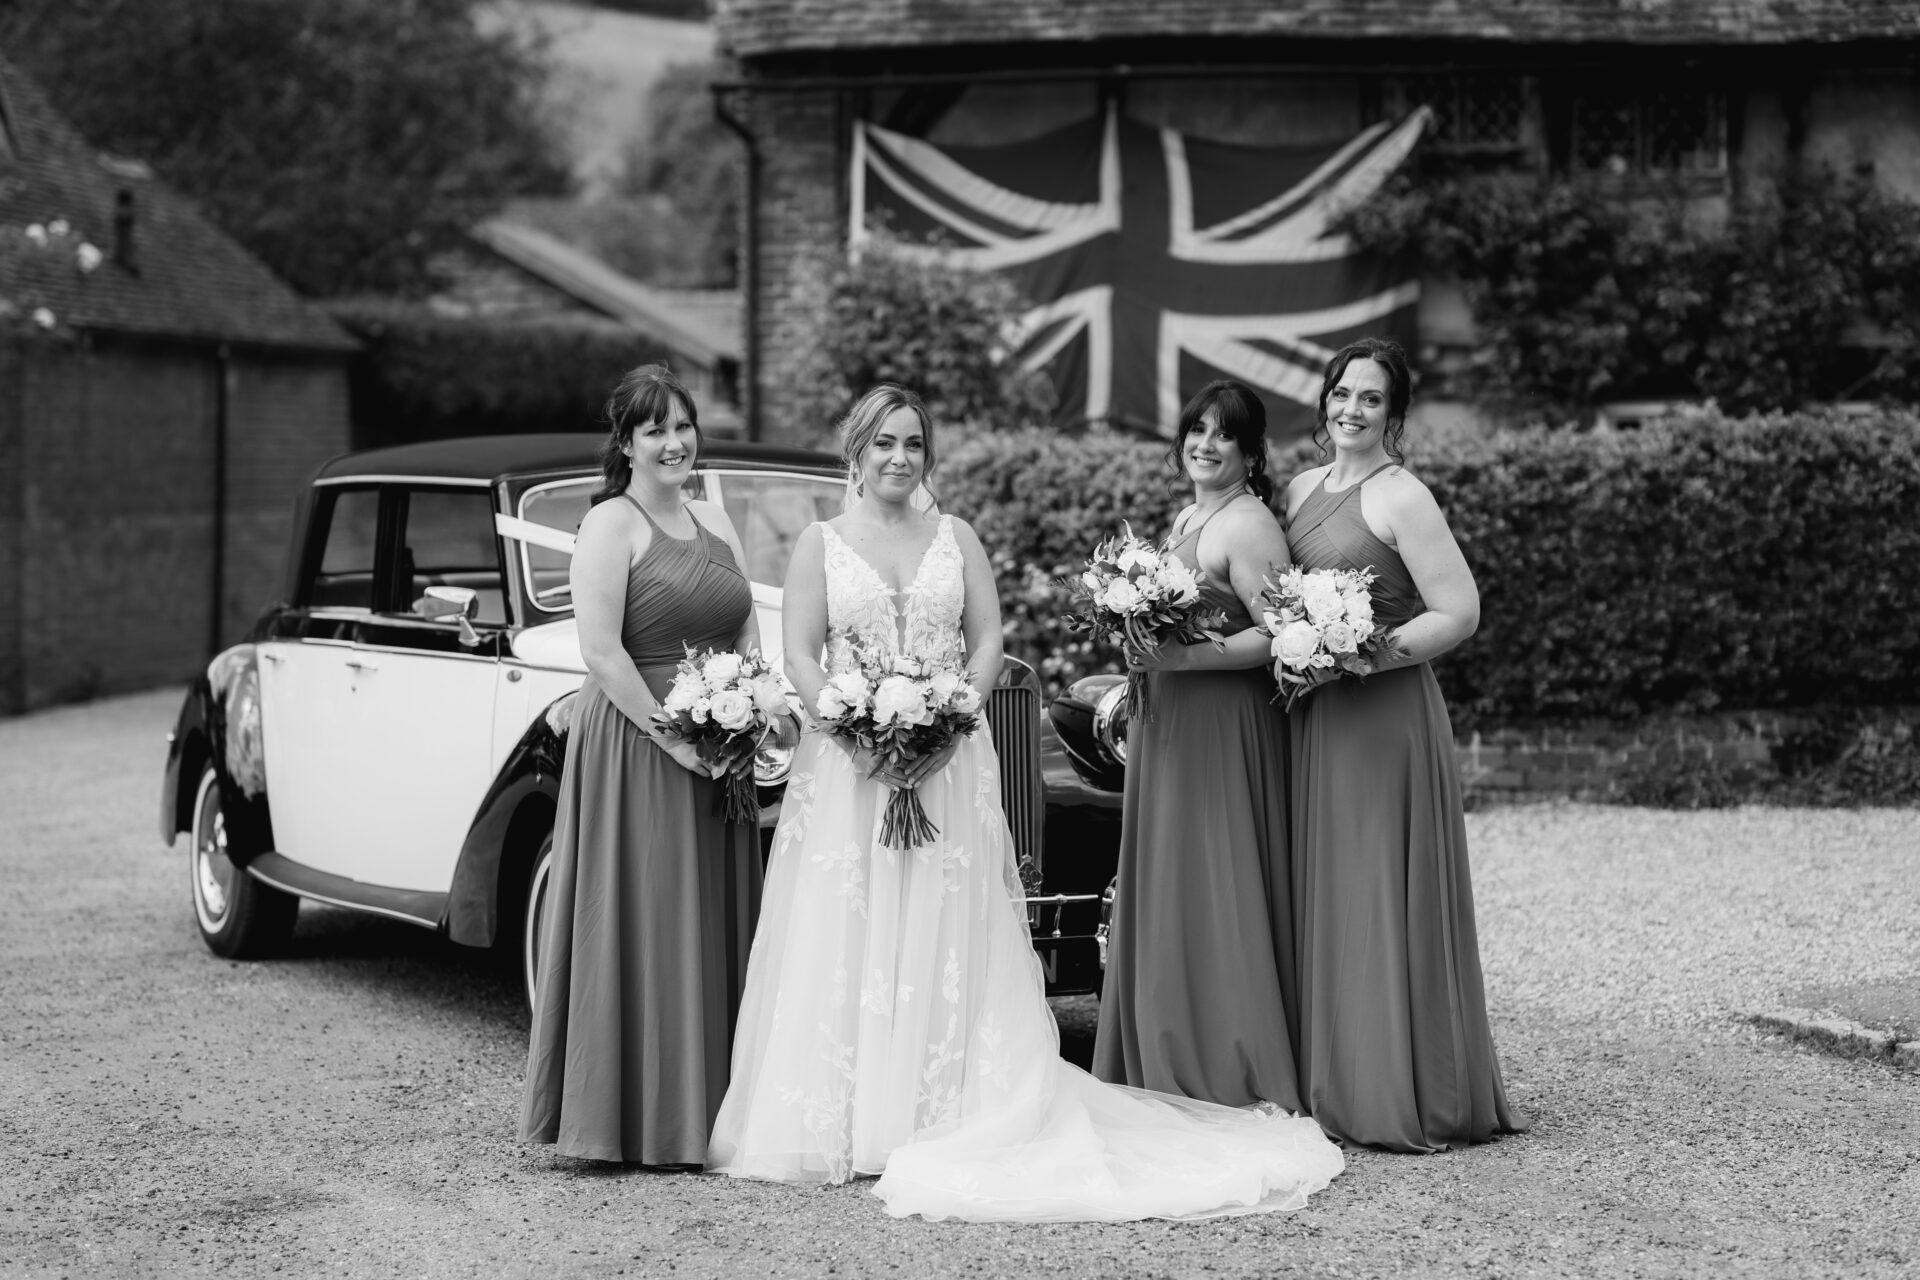 The bride stops for a photo with her bridesmaid in front of the vintage wedding car